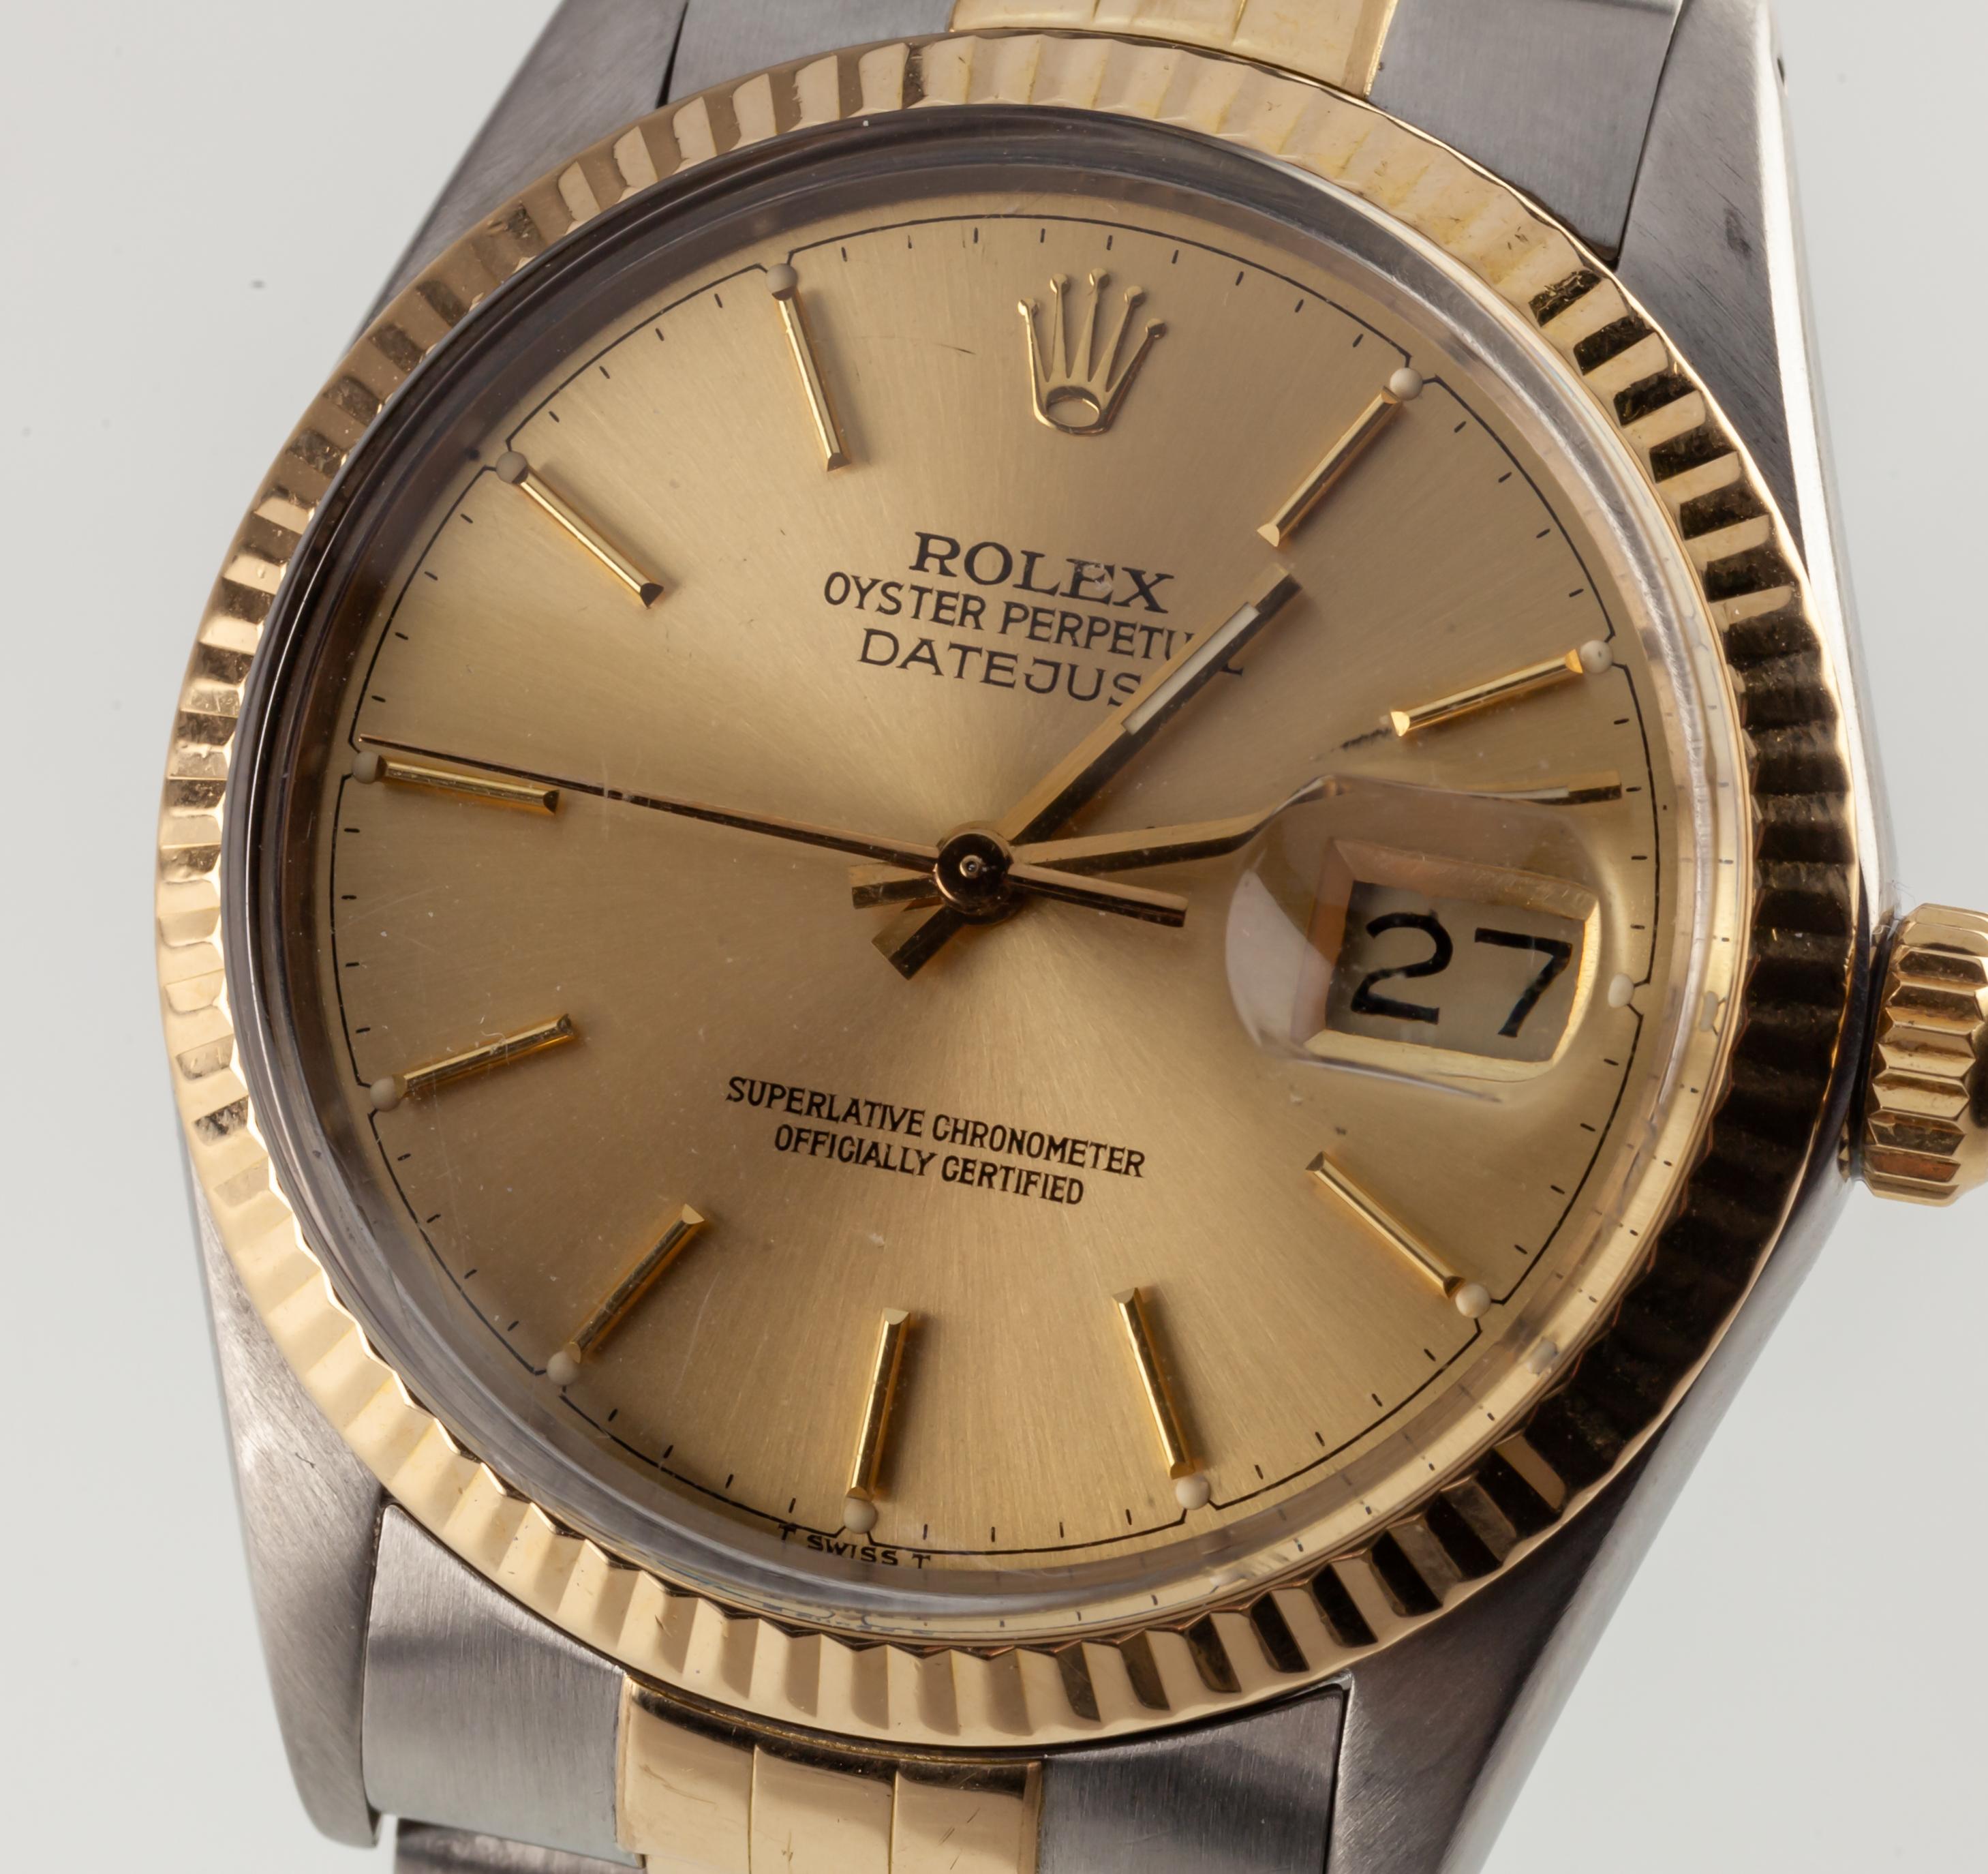 Rolex Men's Two-Tone Jubilee Oyster Perpetual Datejust Watch 16013 1986 In Good Condition For Sale In Sherman Oaks, CA